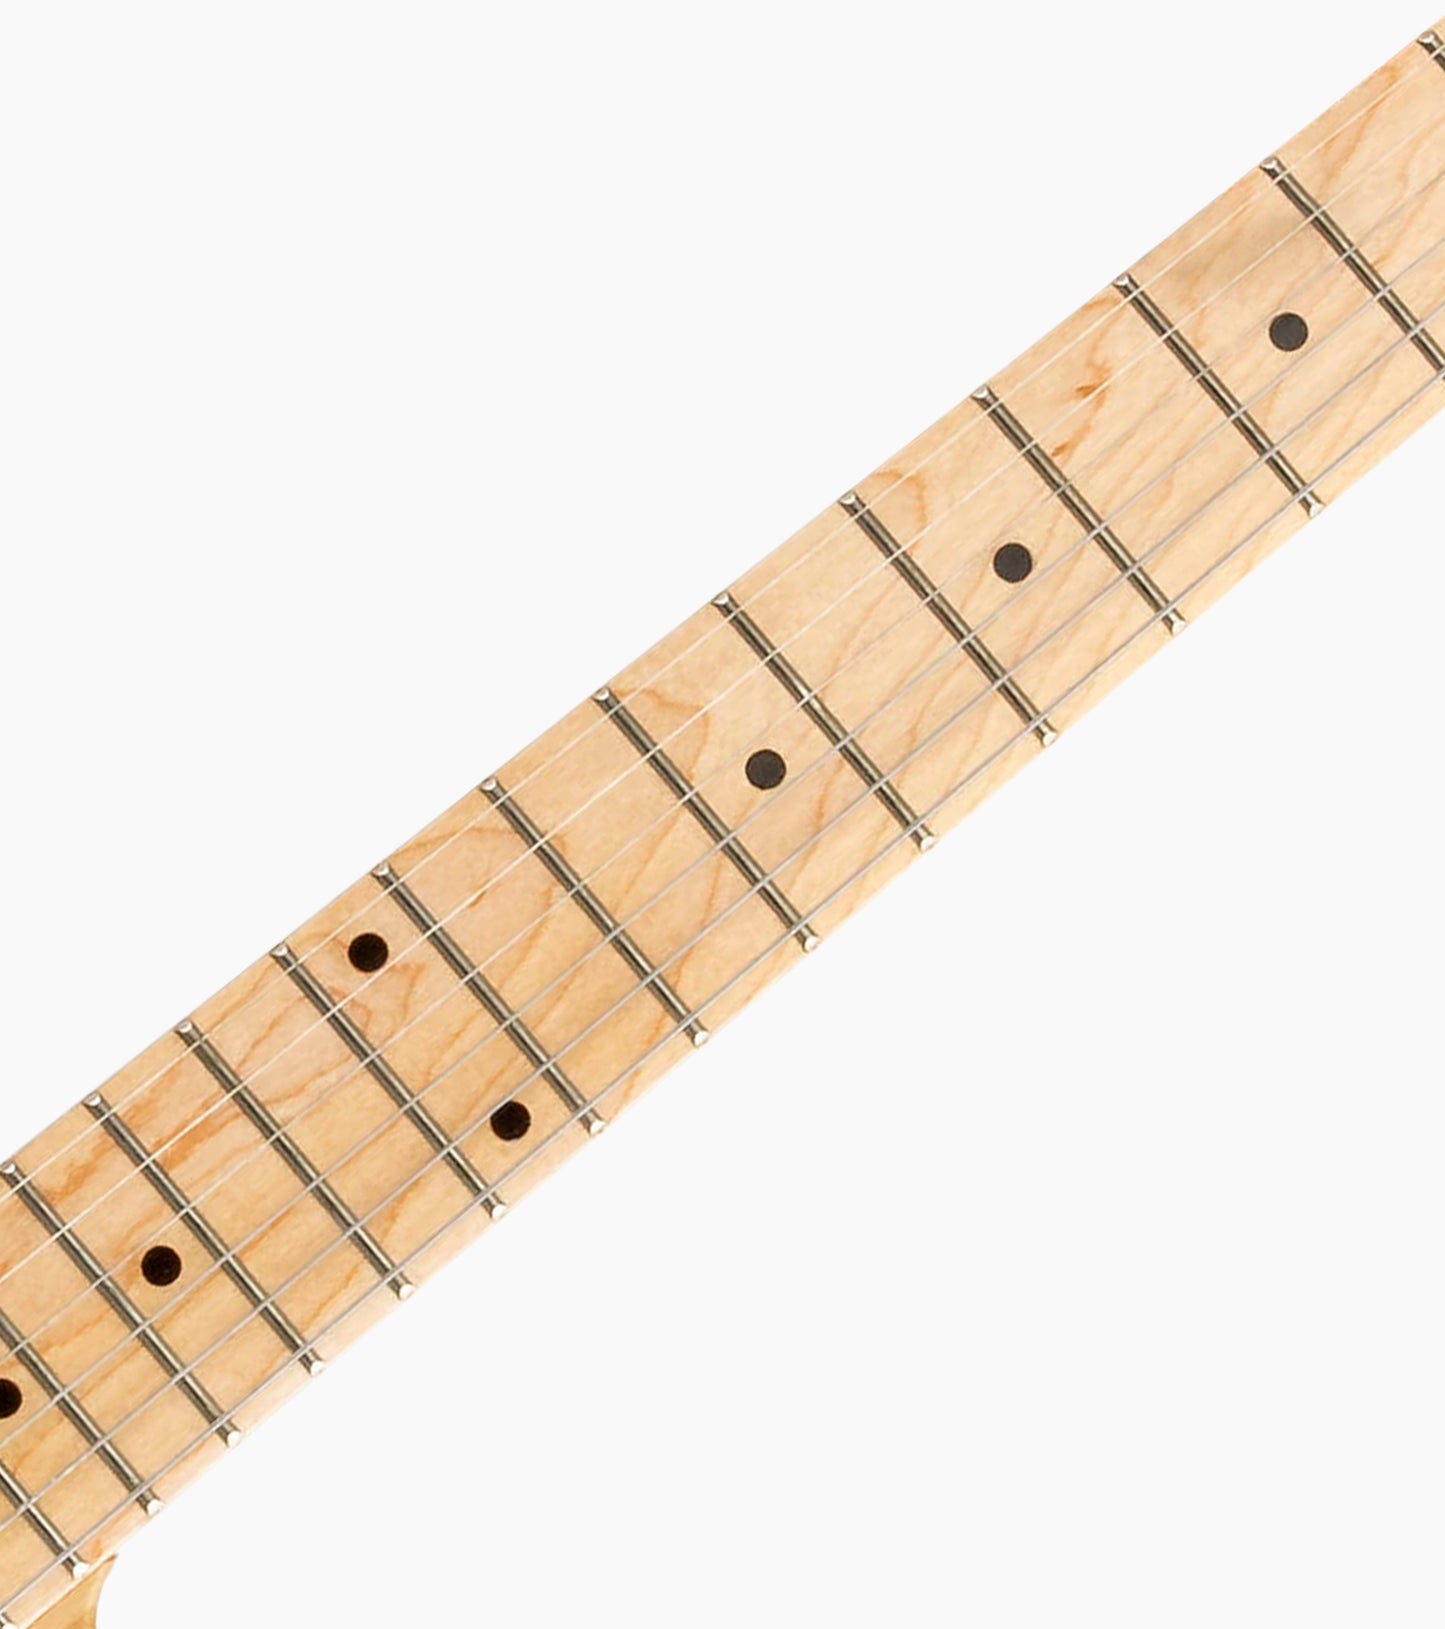 close-up of Natural Left Handed single-cutaway electric guitar fretboard